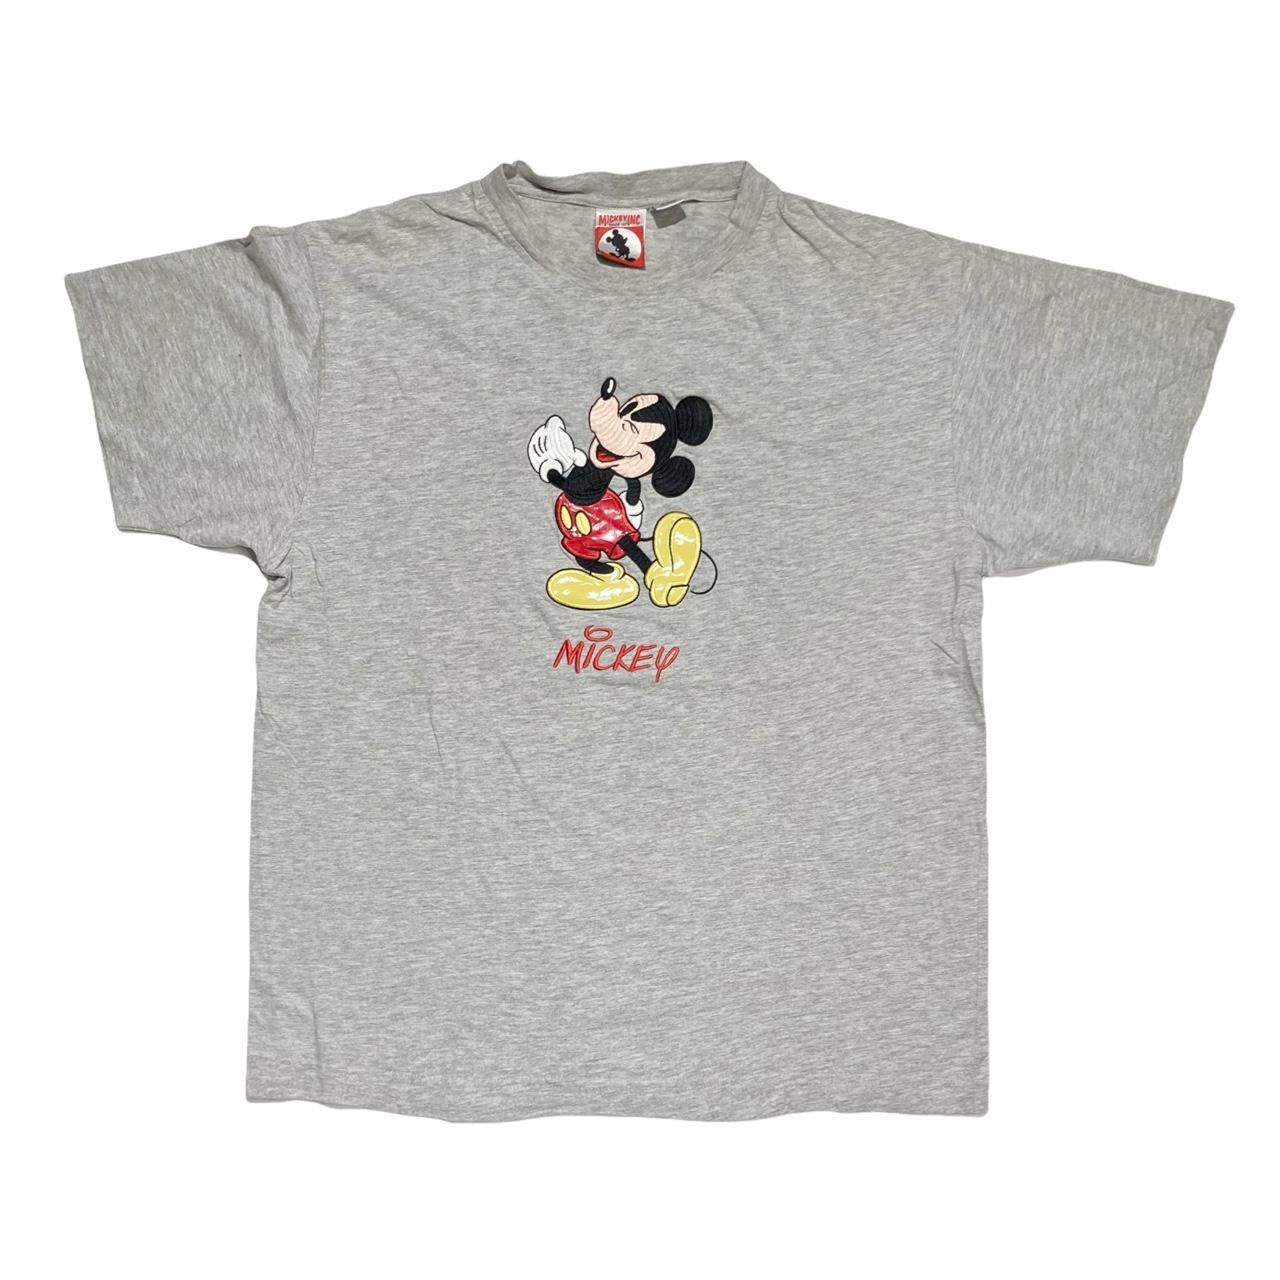 Product Image 1 - Vintage Mickey Mouse embroidered graphic